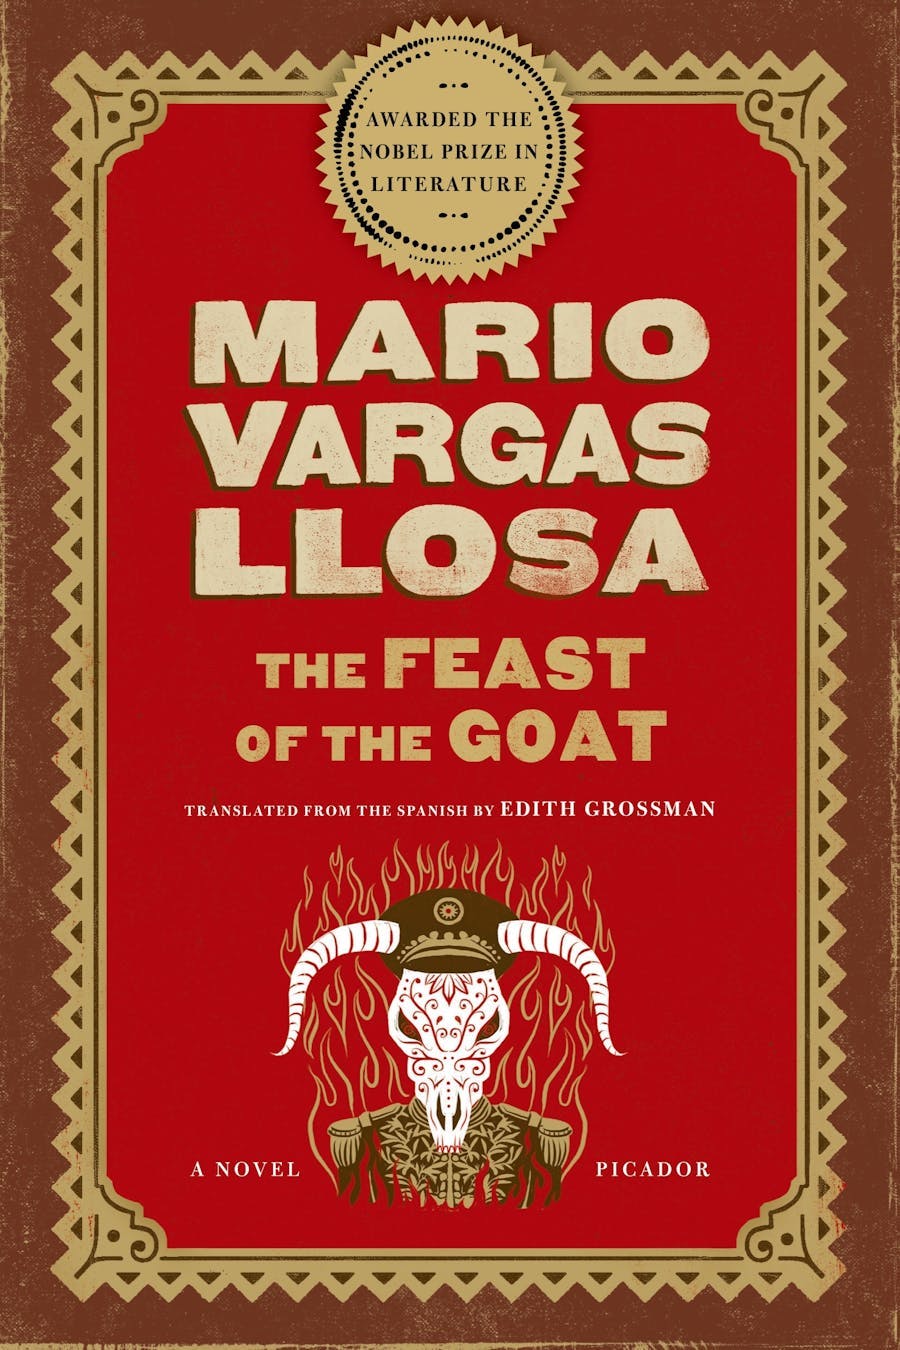 The Feast of the Goat by Mario Vargas Llosa